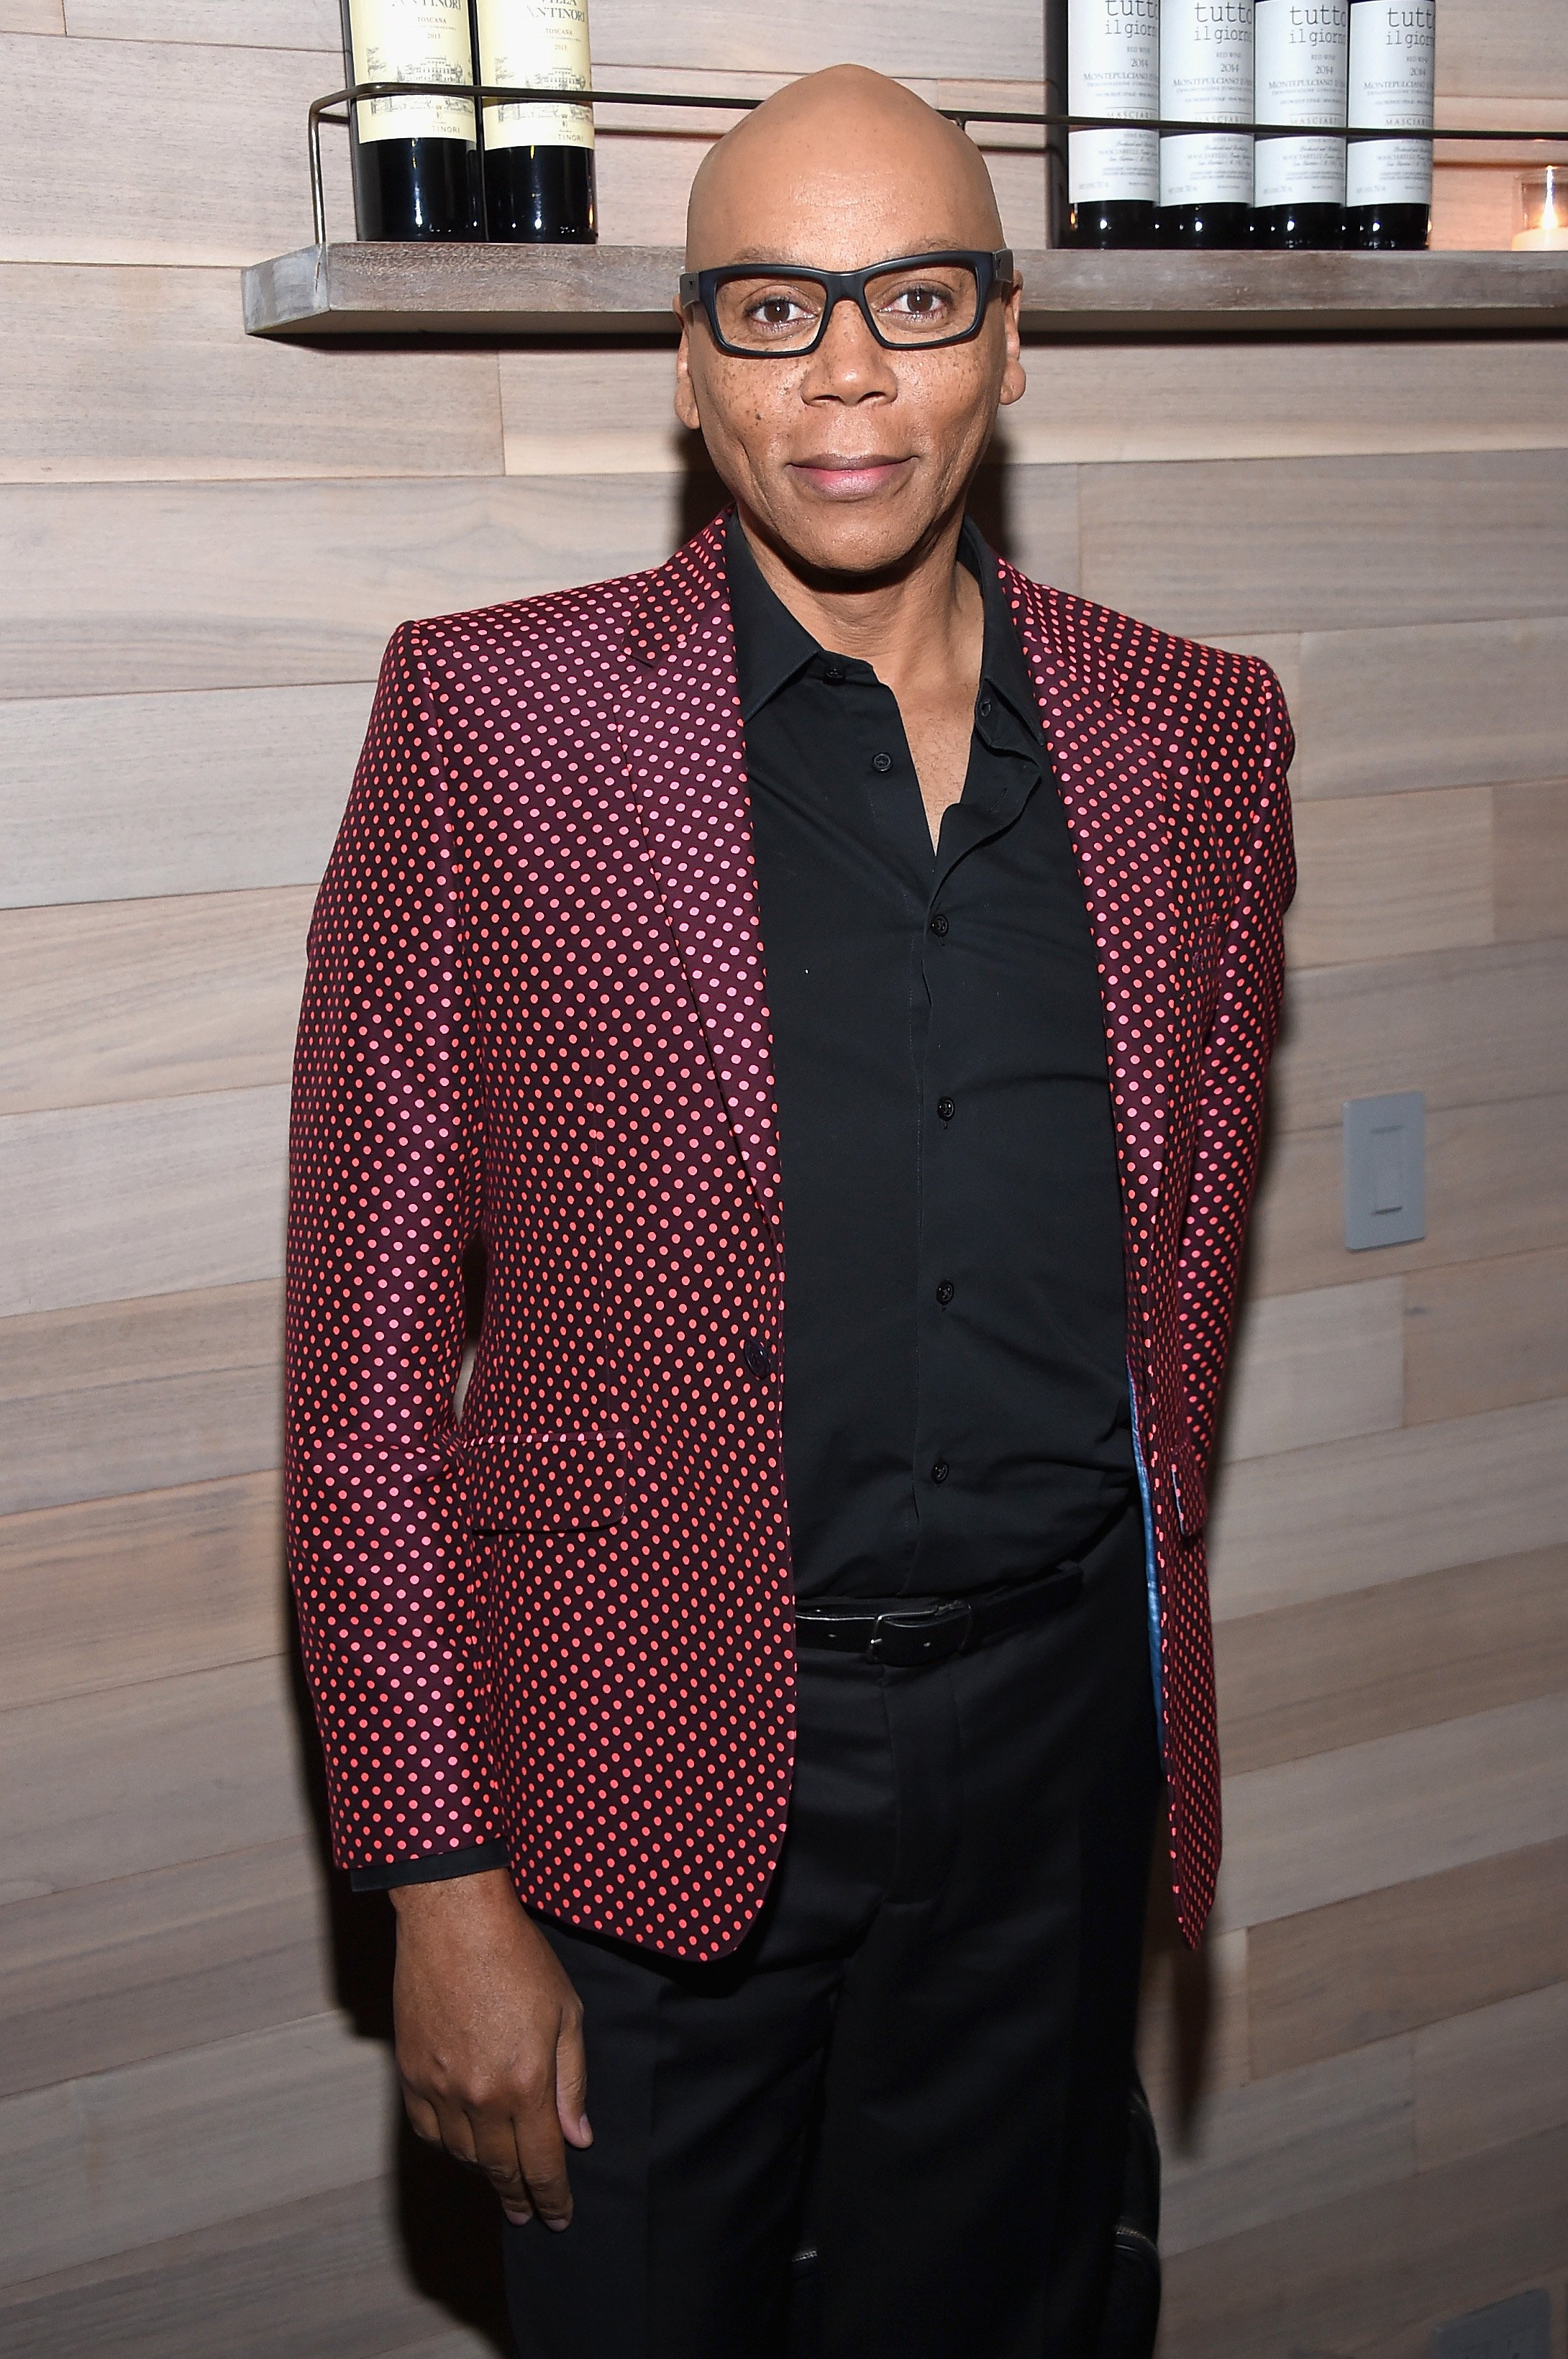 RuPaul attends The Season 2 Premiere Of "Shades Of Blue" after party  on March 1, 2017 in New York City. | Source: Getty Images